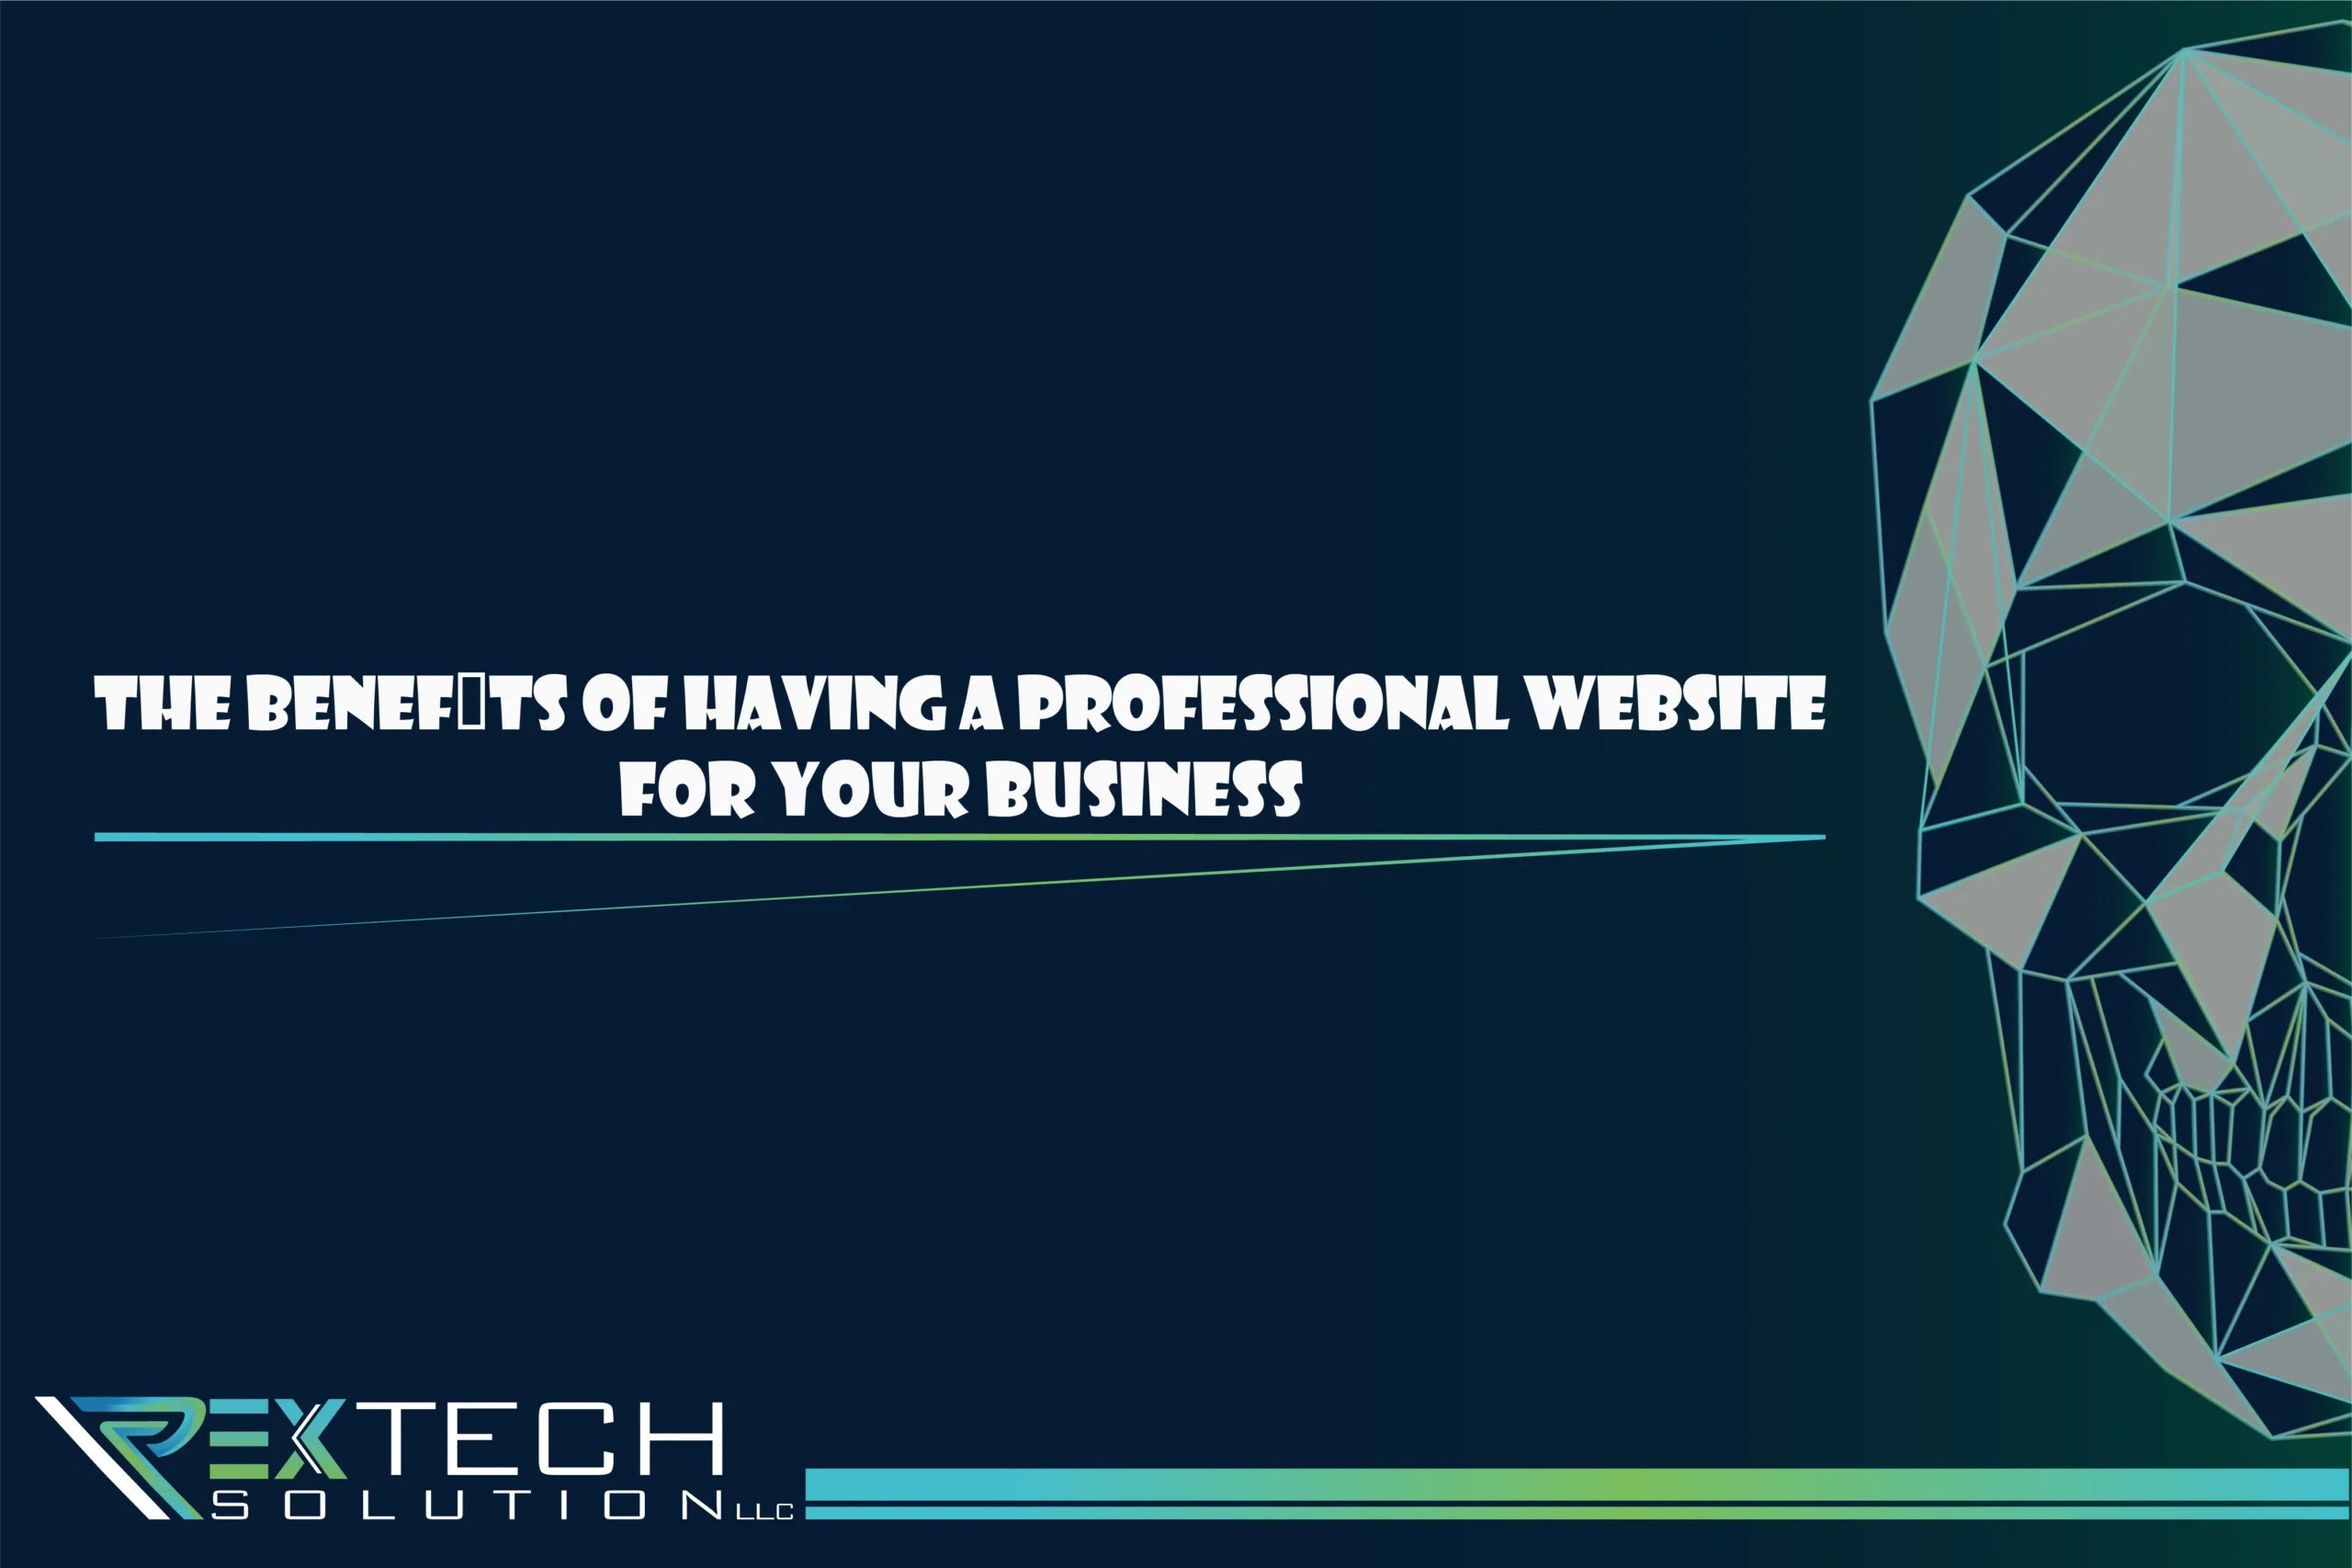 The Benefits of Having a Professional Website for Your Business